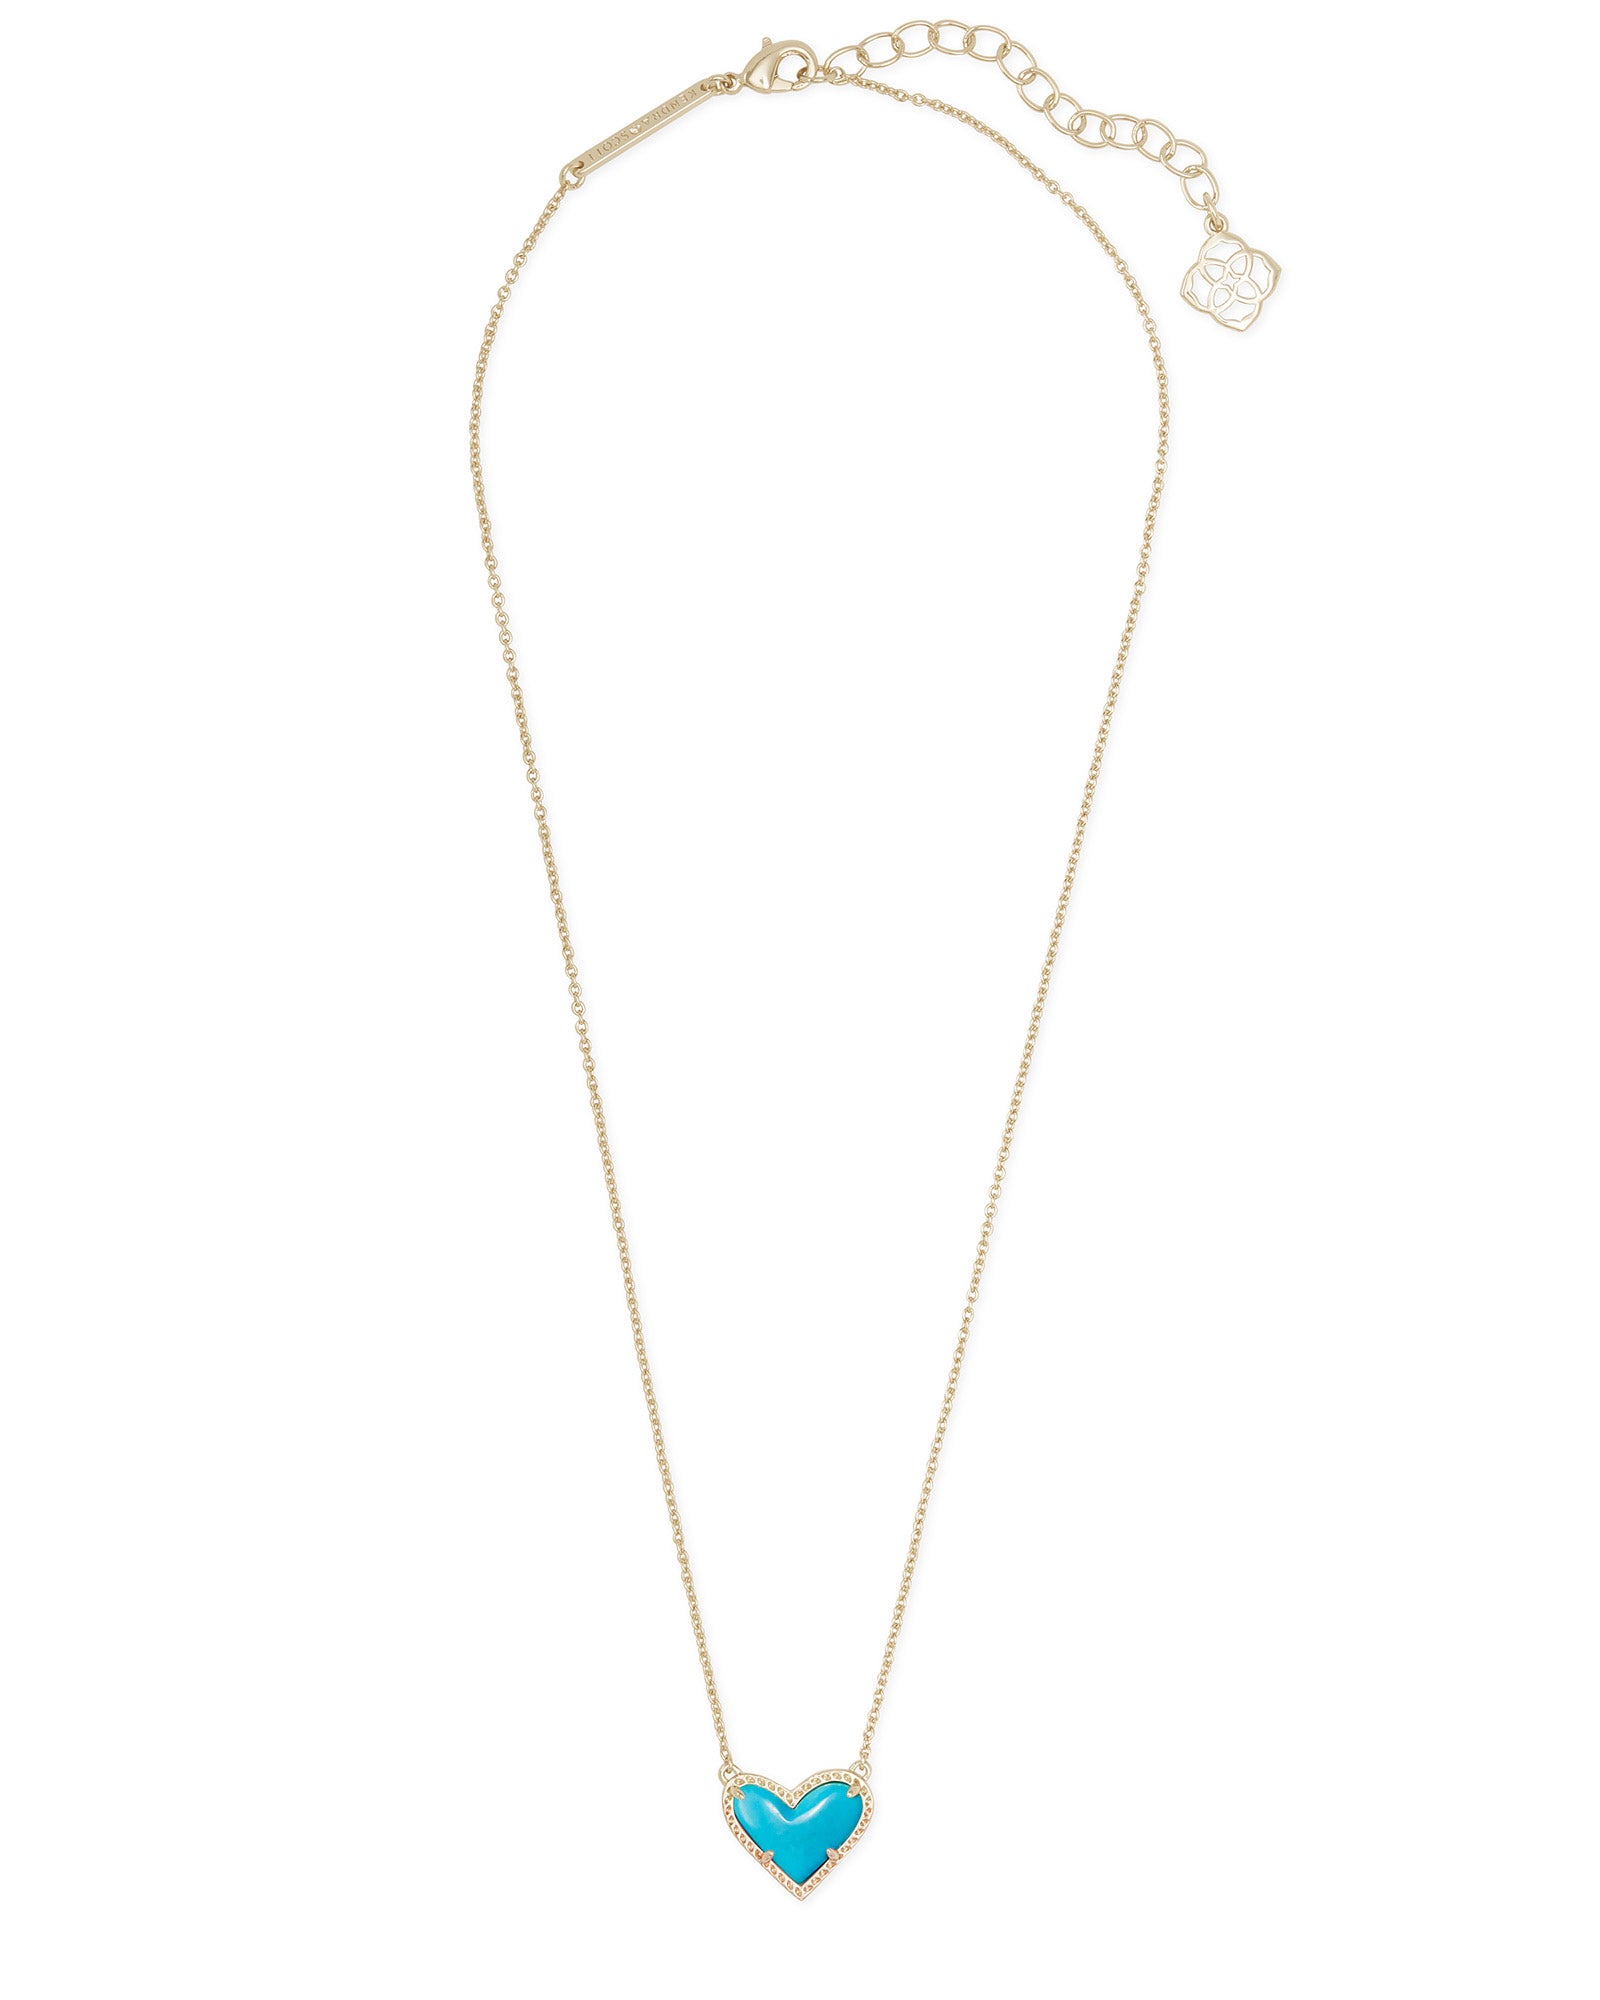 Kendra Scott Ari Pendant Necklace in Gold and Silver